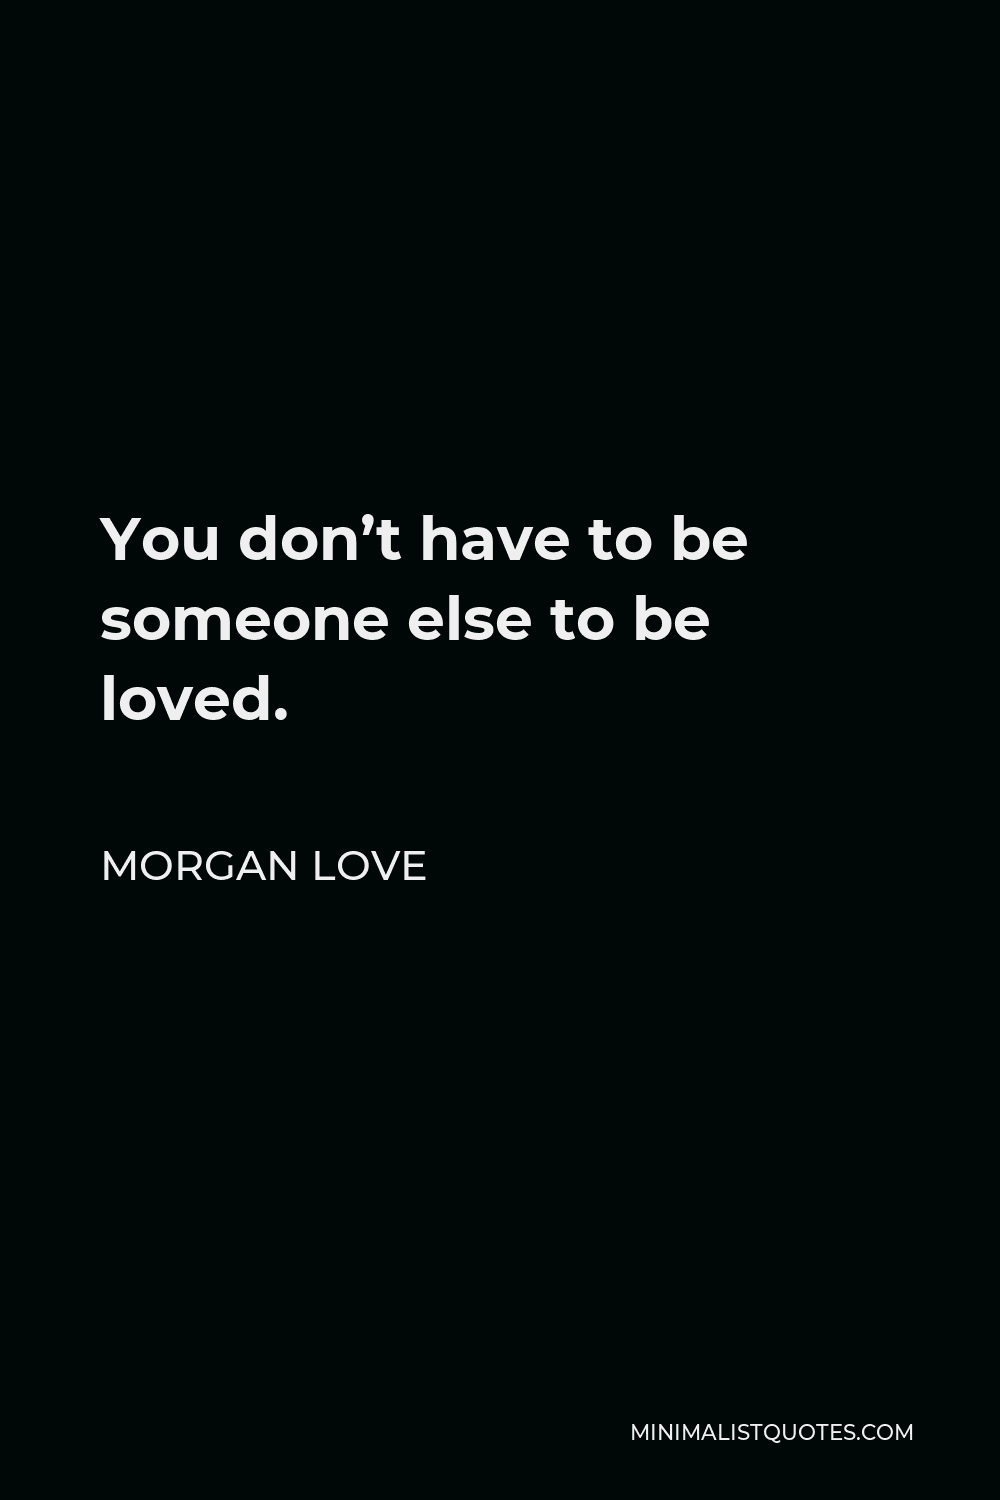 Morgan Love Quote - You don’t have to be someone else to be loved.